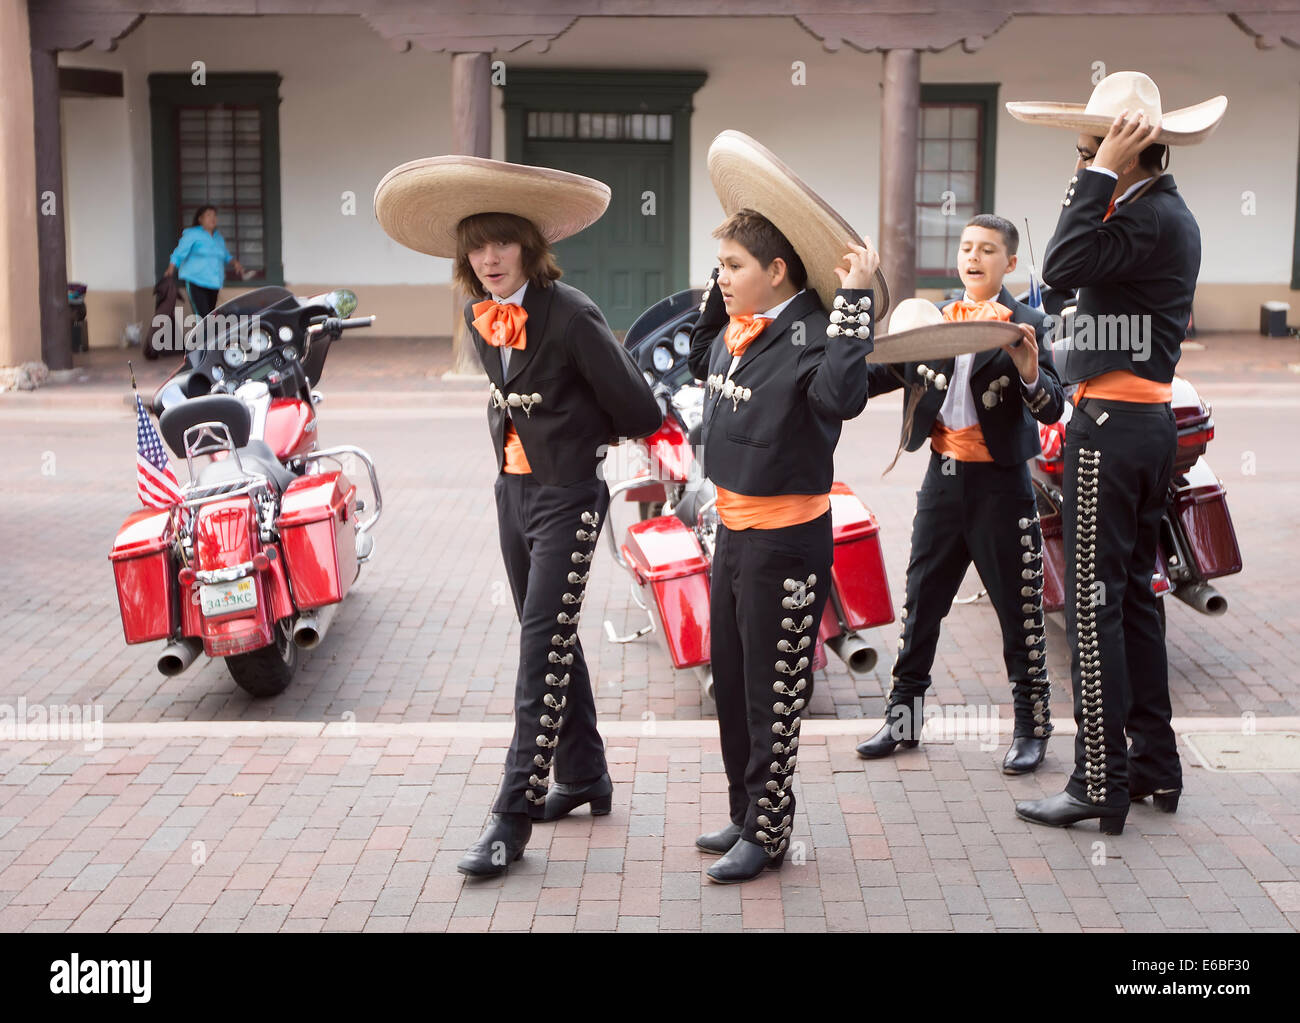 Hispanic folkloric dance group performing in Santa Fe, New Mexico, during Bandstand 2014, a celebration of music and dance. Stock Photo